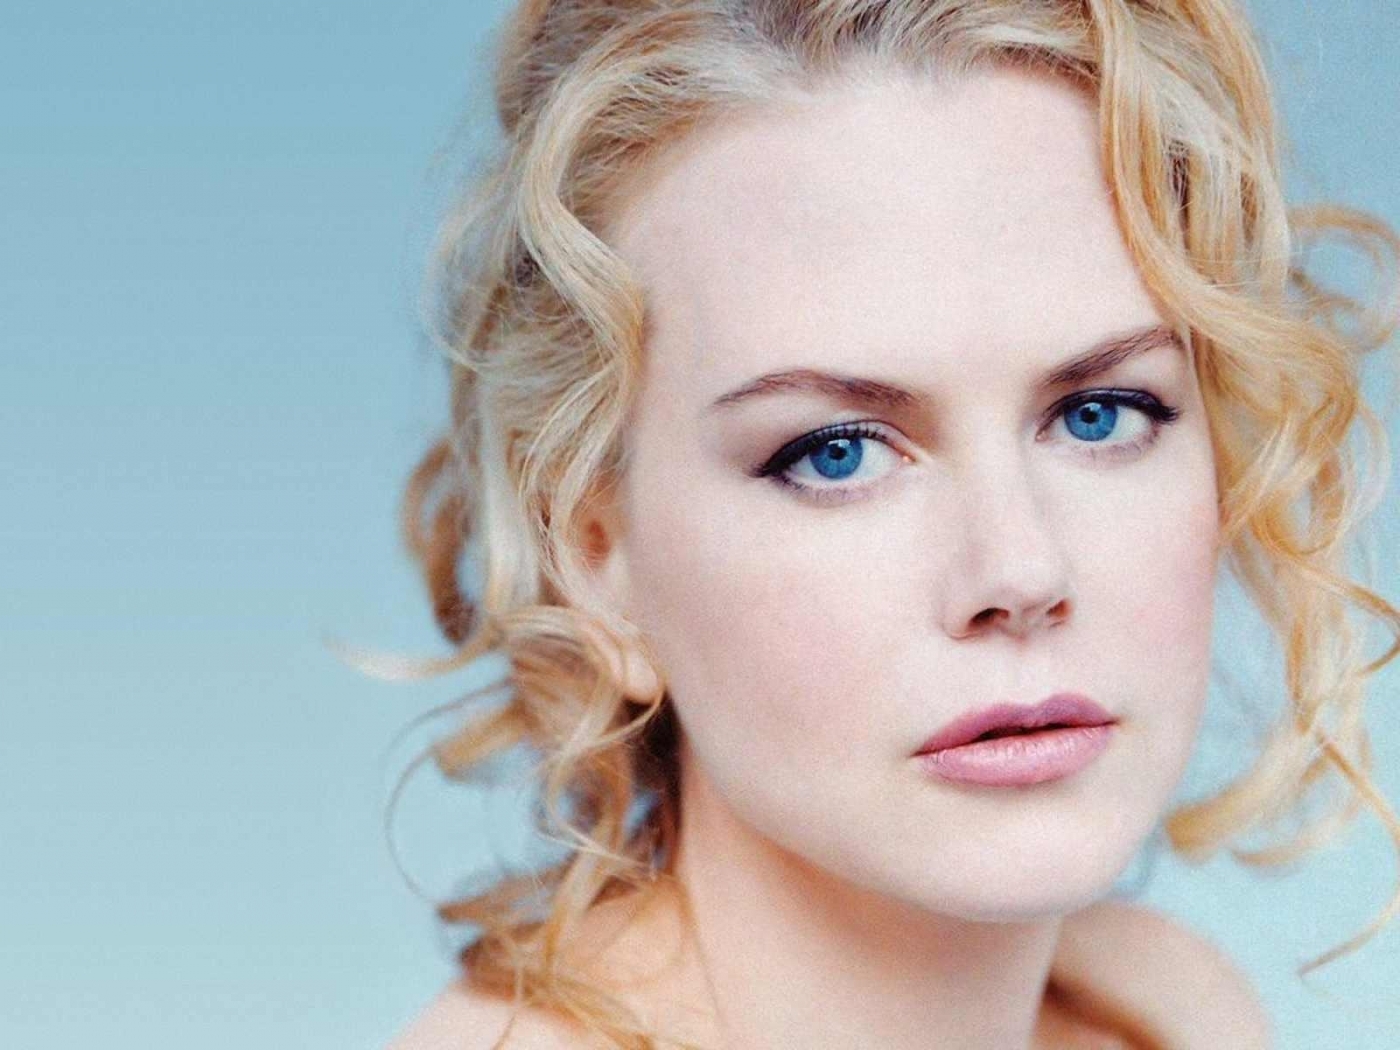 49758 download wallpaper people, girls, nicole kidman screensavers and pictures for free